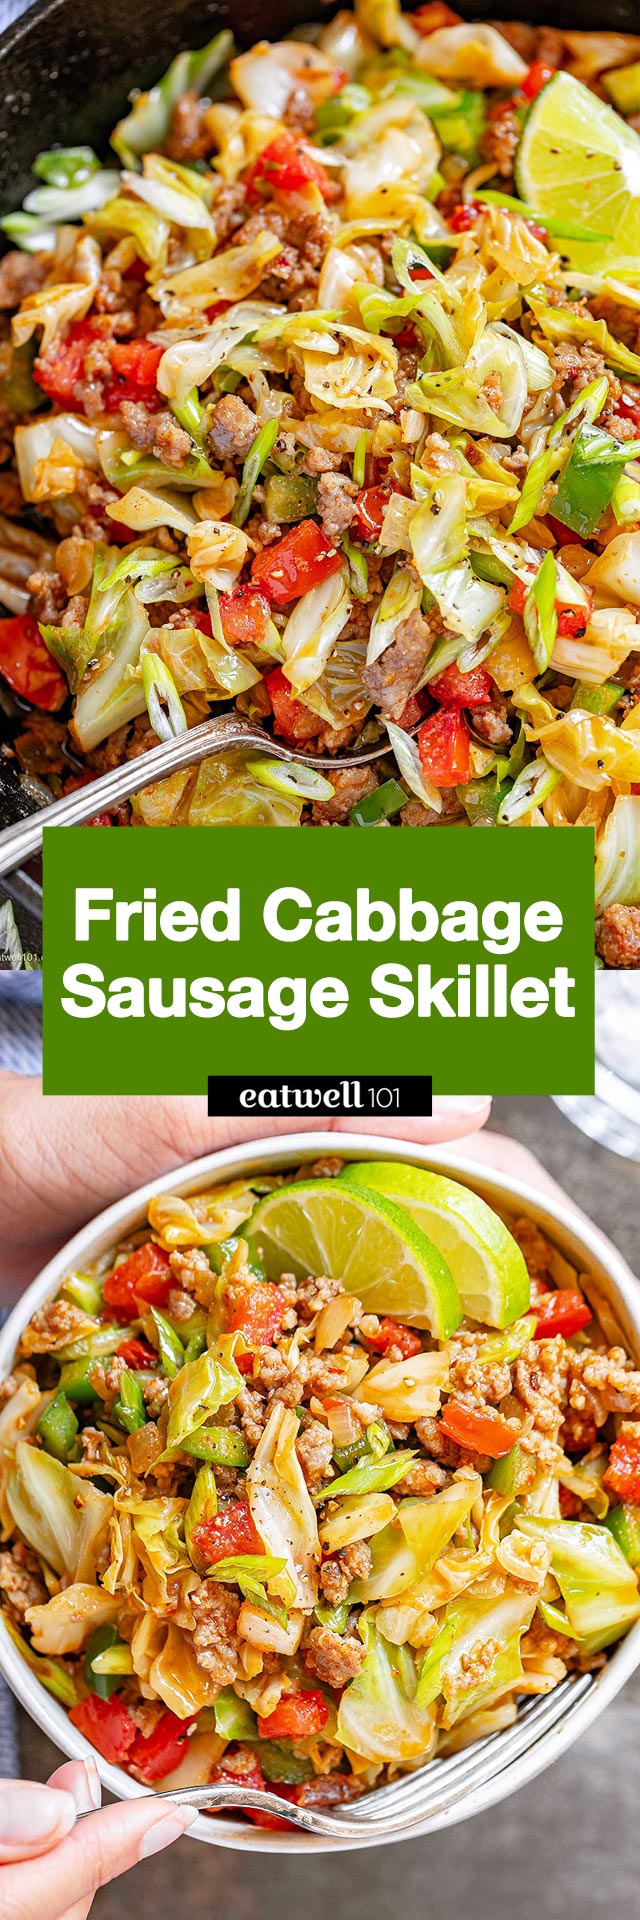 Fried Cabbage Sausage Skillet Recipe - #cabbage #sausage #eatwell101 #recipe - This fried cabbage and smoked sausage recipe is just the perfect way to pt dinner on the table in under 30 minutes, using just one pan! 